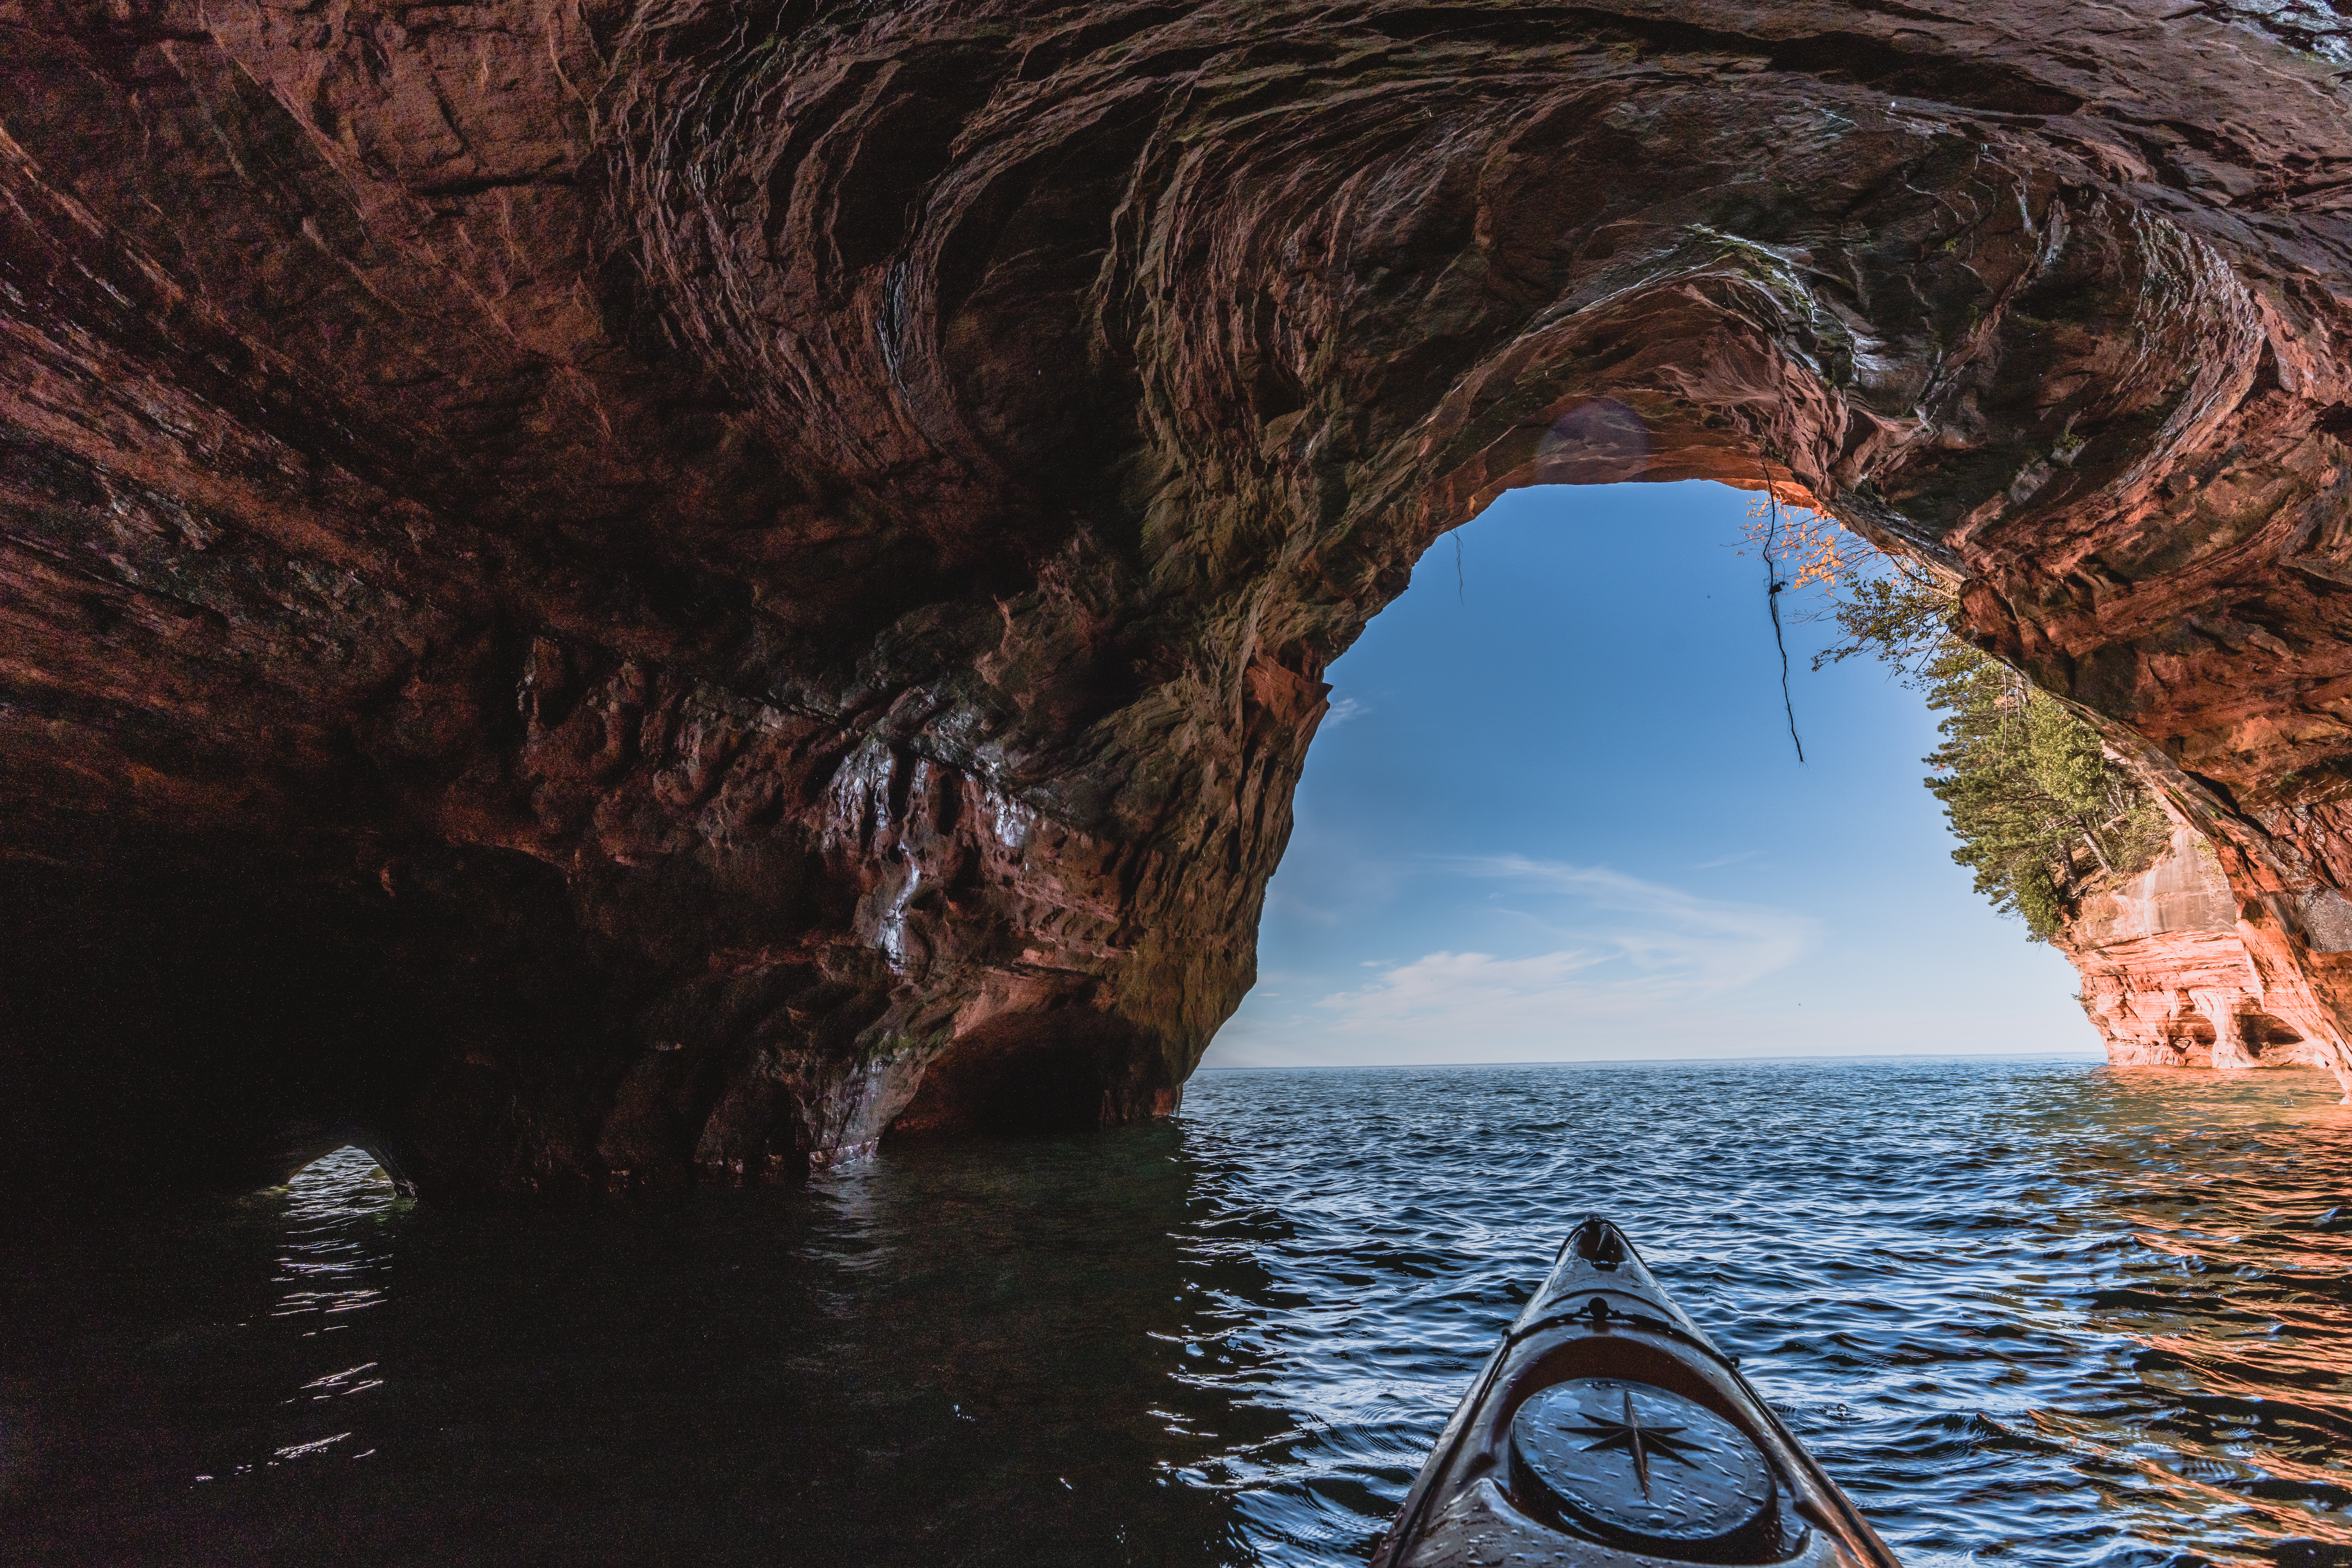 madeline island cave tours